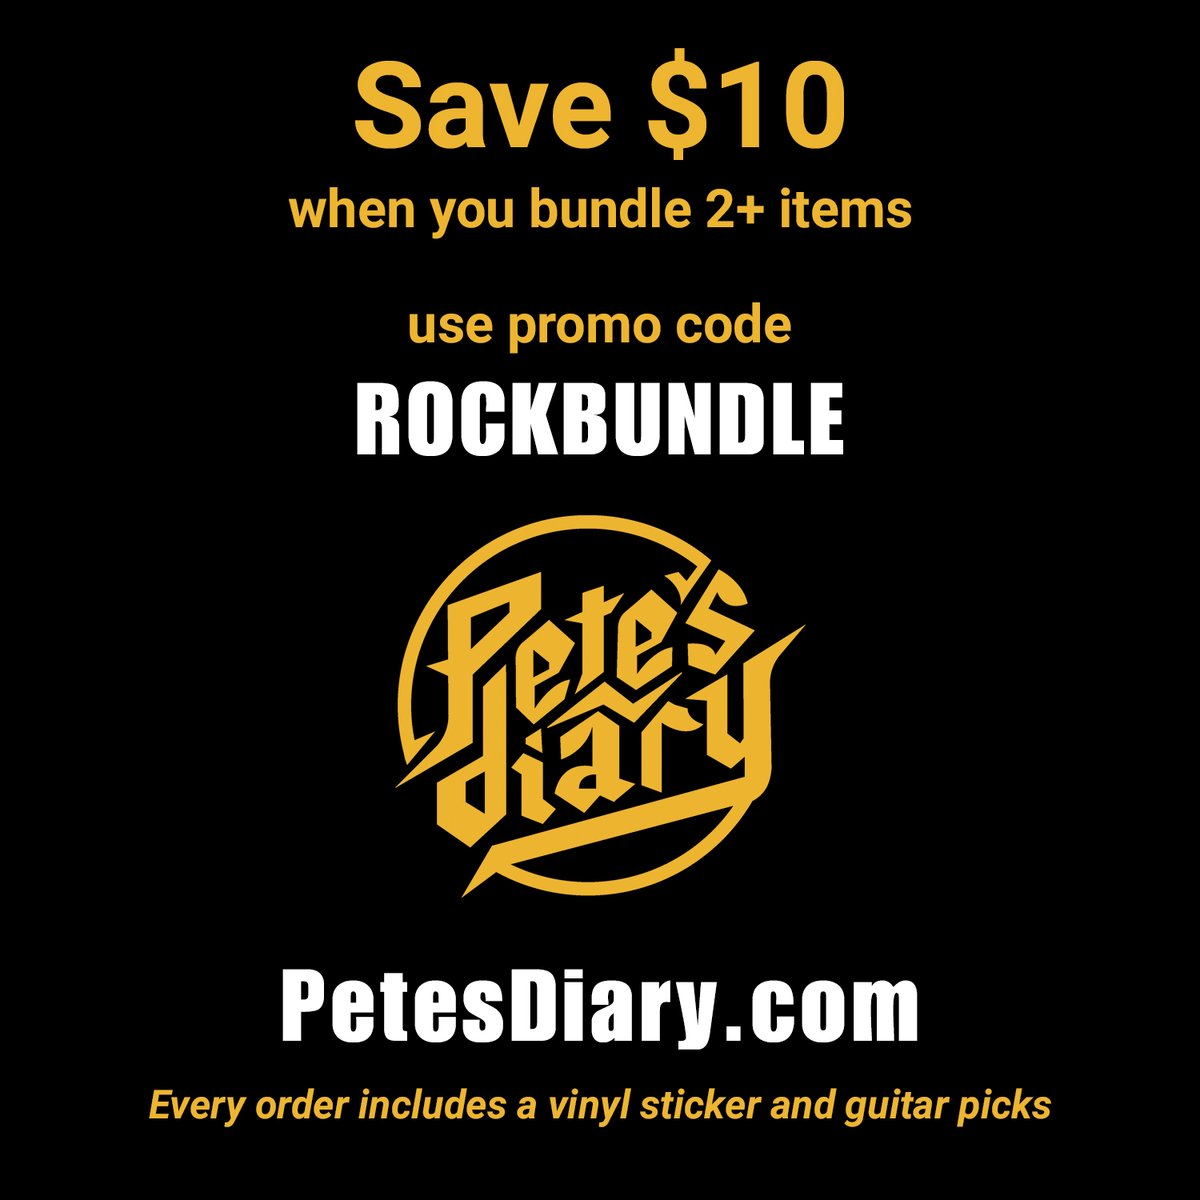 Our award winning books make great gifts! Order directly from us to receive an autographed book plus guitar picks and vinyl stickers. Plus, we offer $10 off 2+ items with code ROCKBUNDLE.

Click here to order petesdiary.com/shop